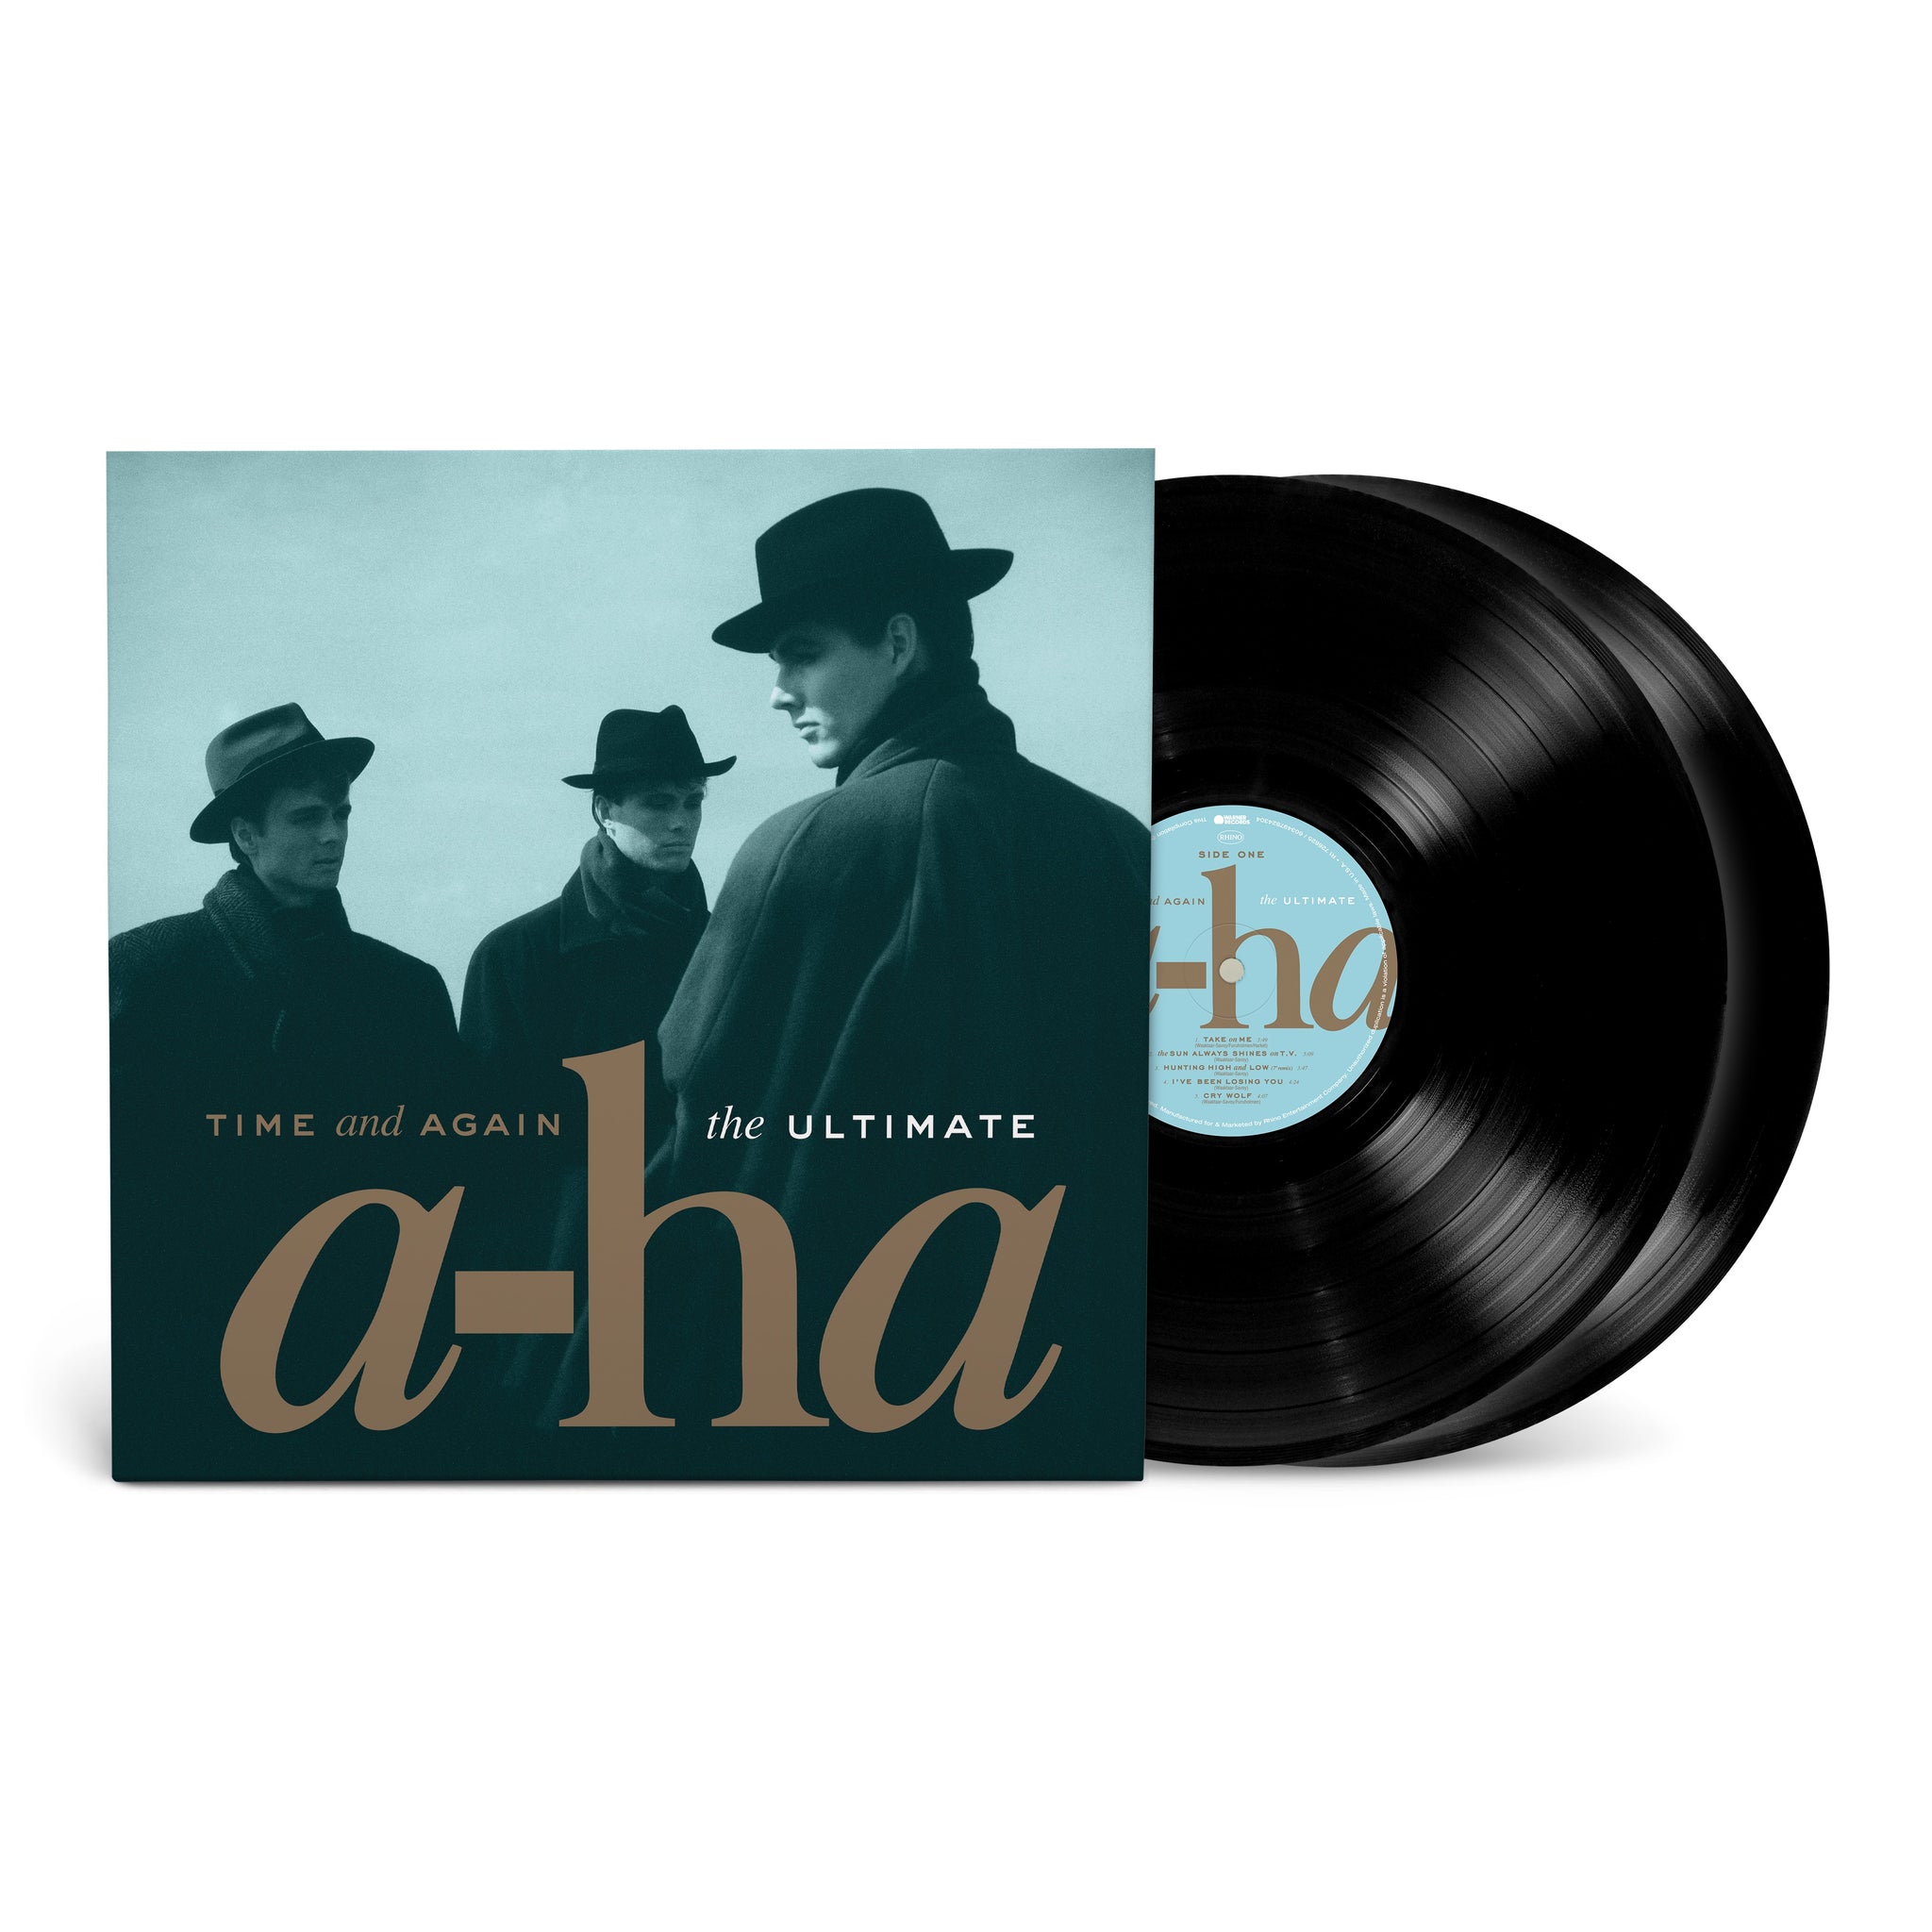 A-HA - Time and Again: The Ultimate A-Ha - 2LP - Vinyl [AUG 9]